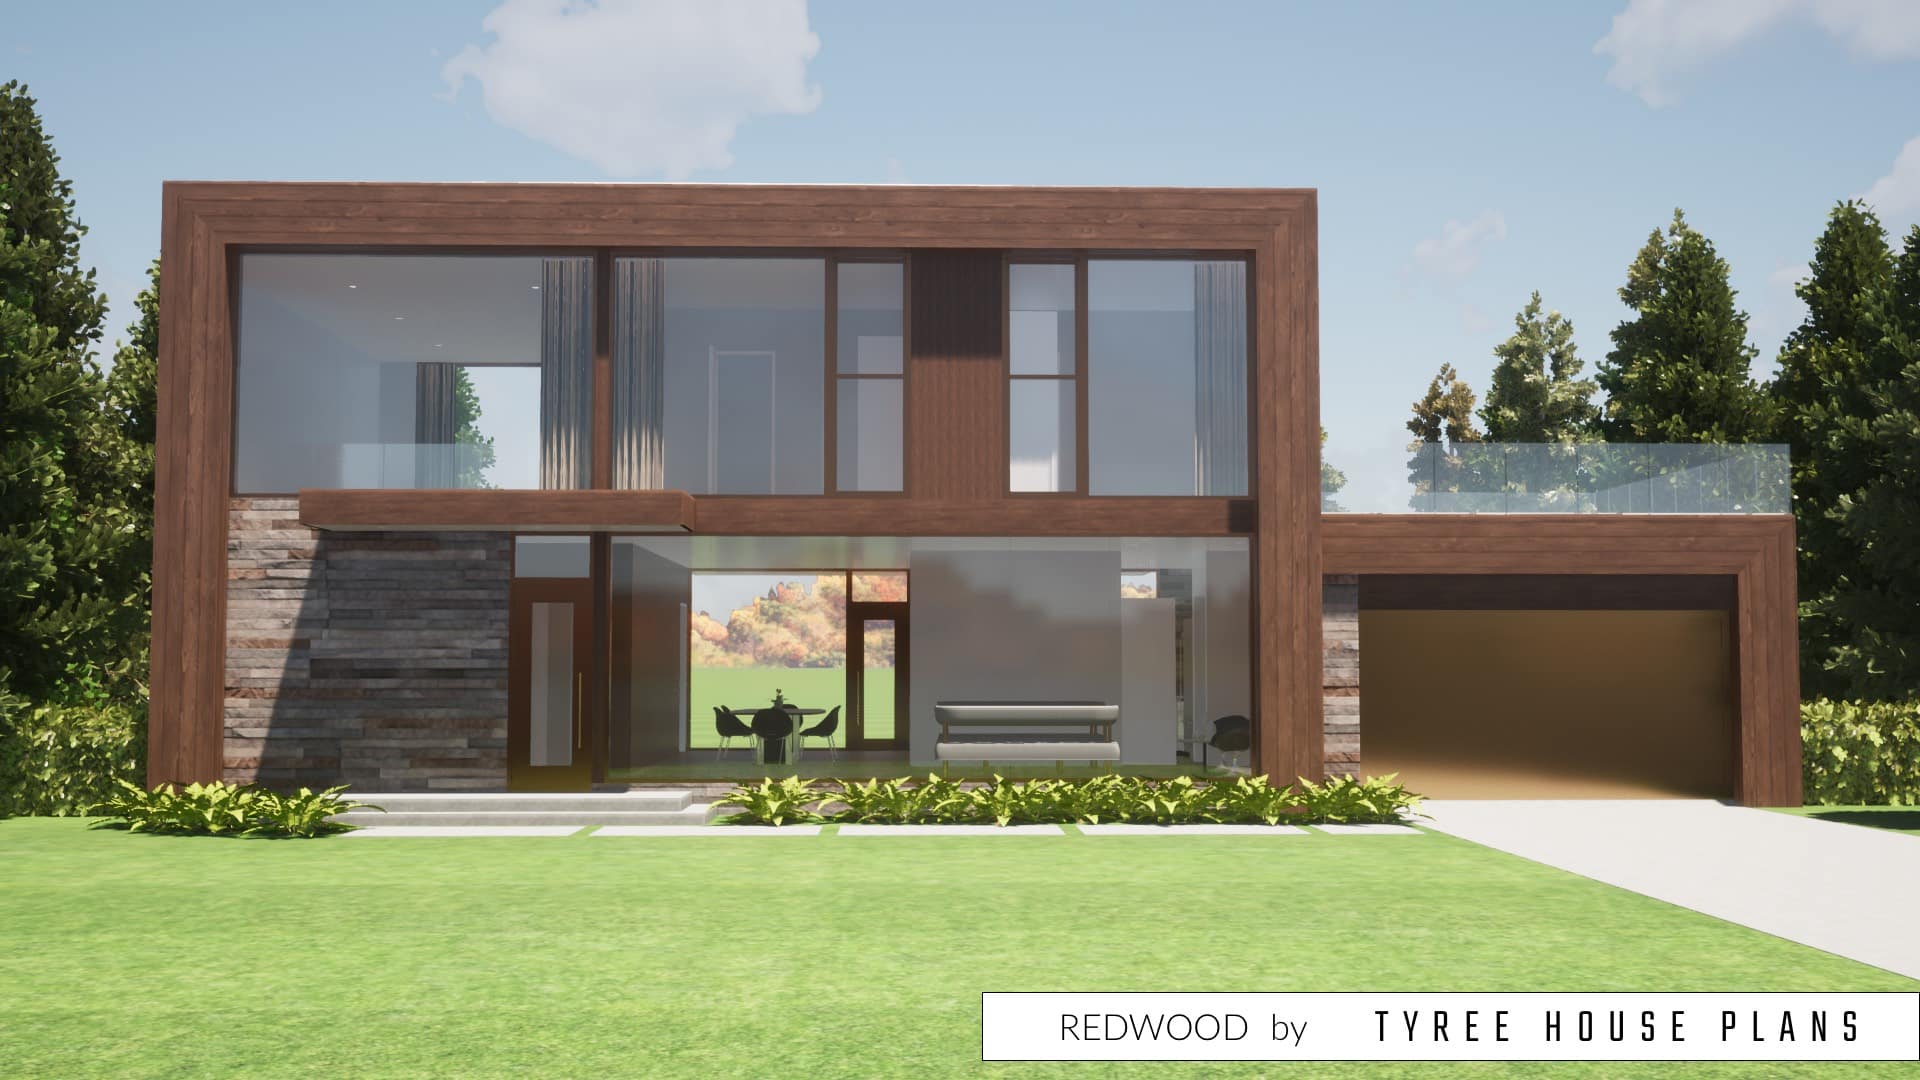 Redwood House Plan by Tyree House Plans